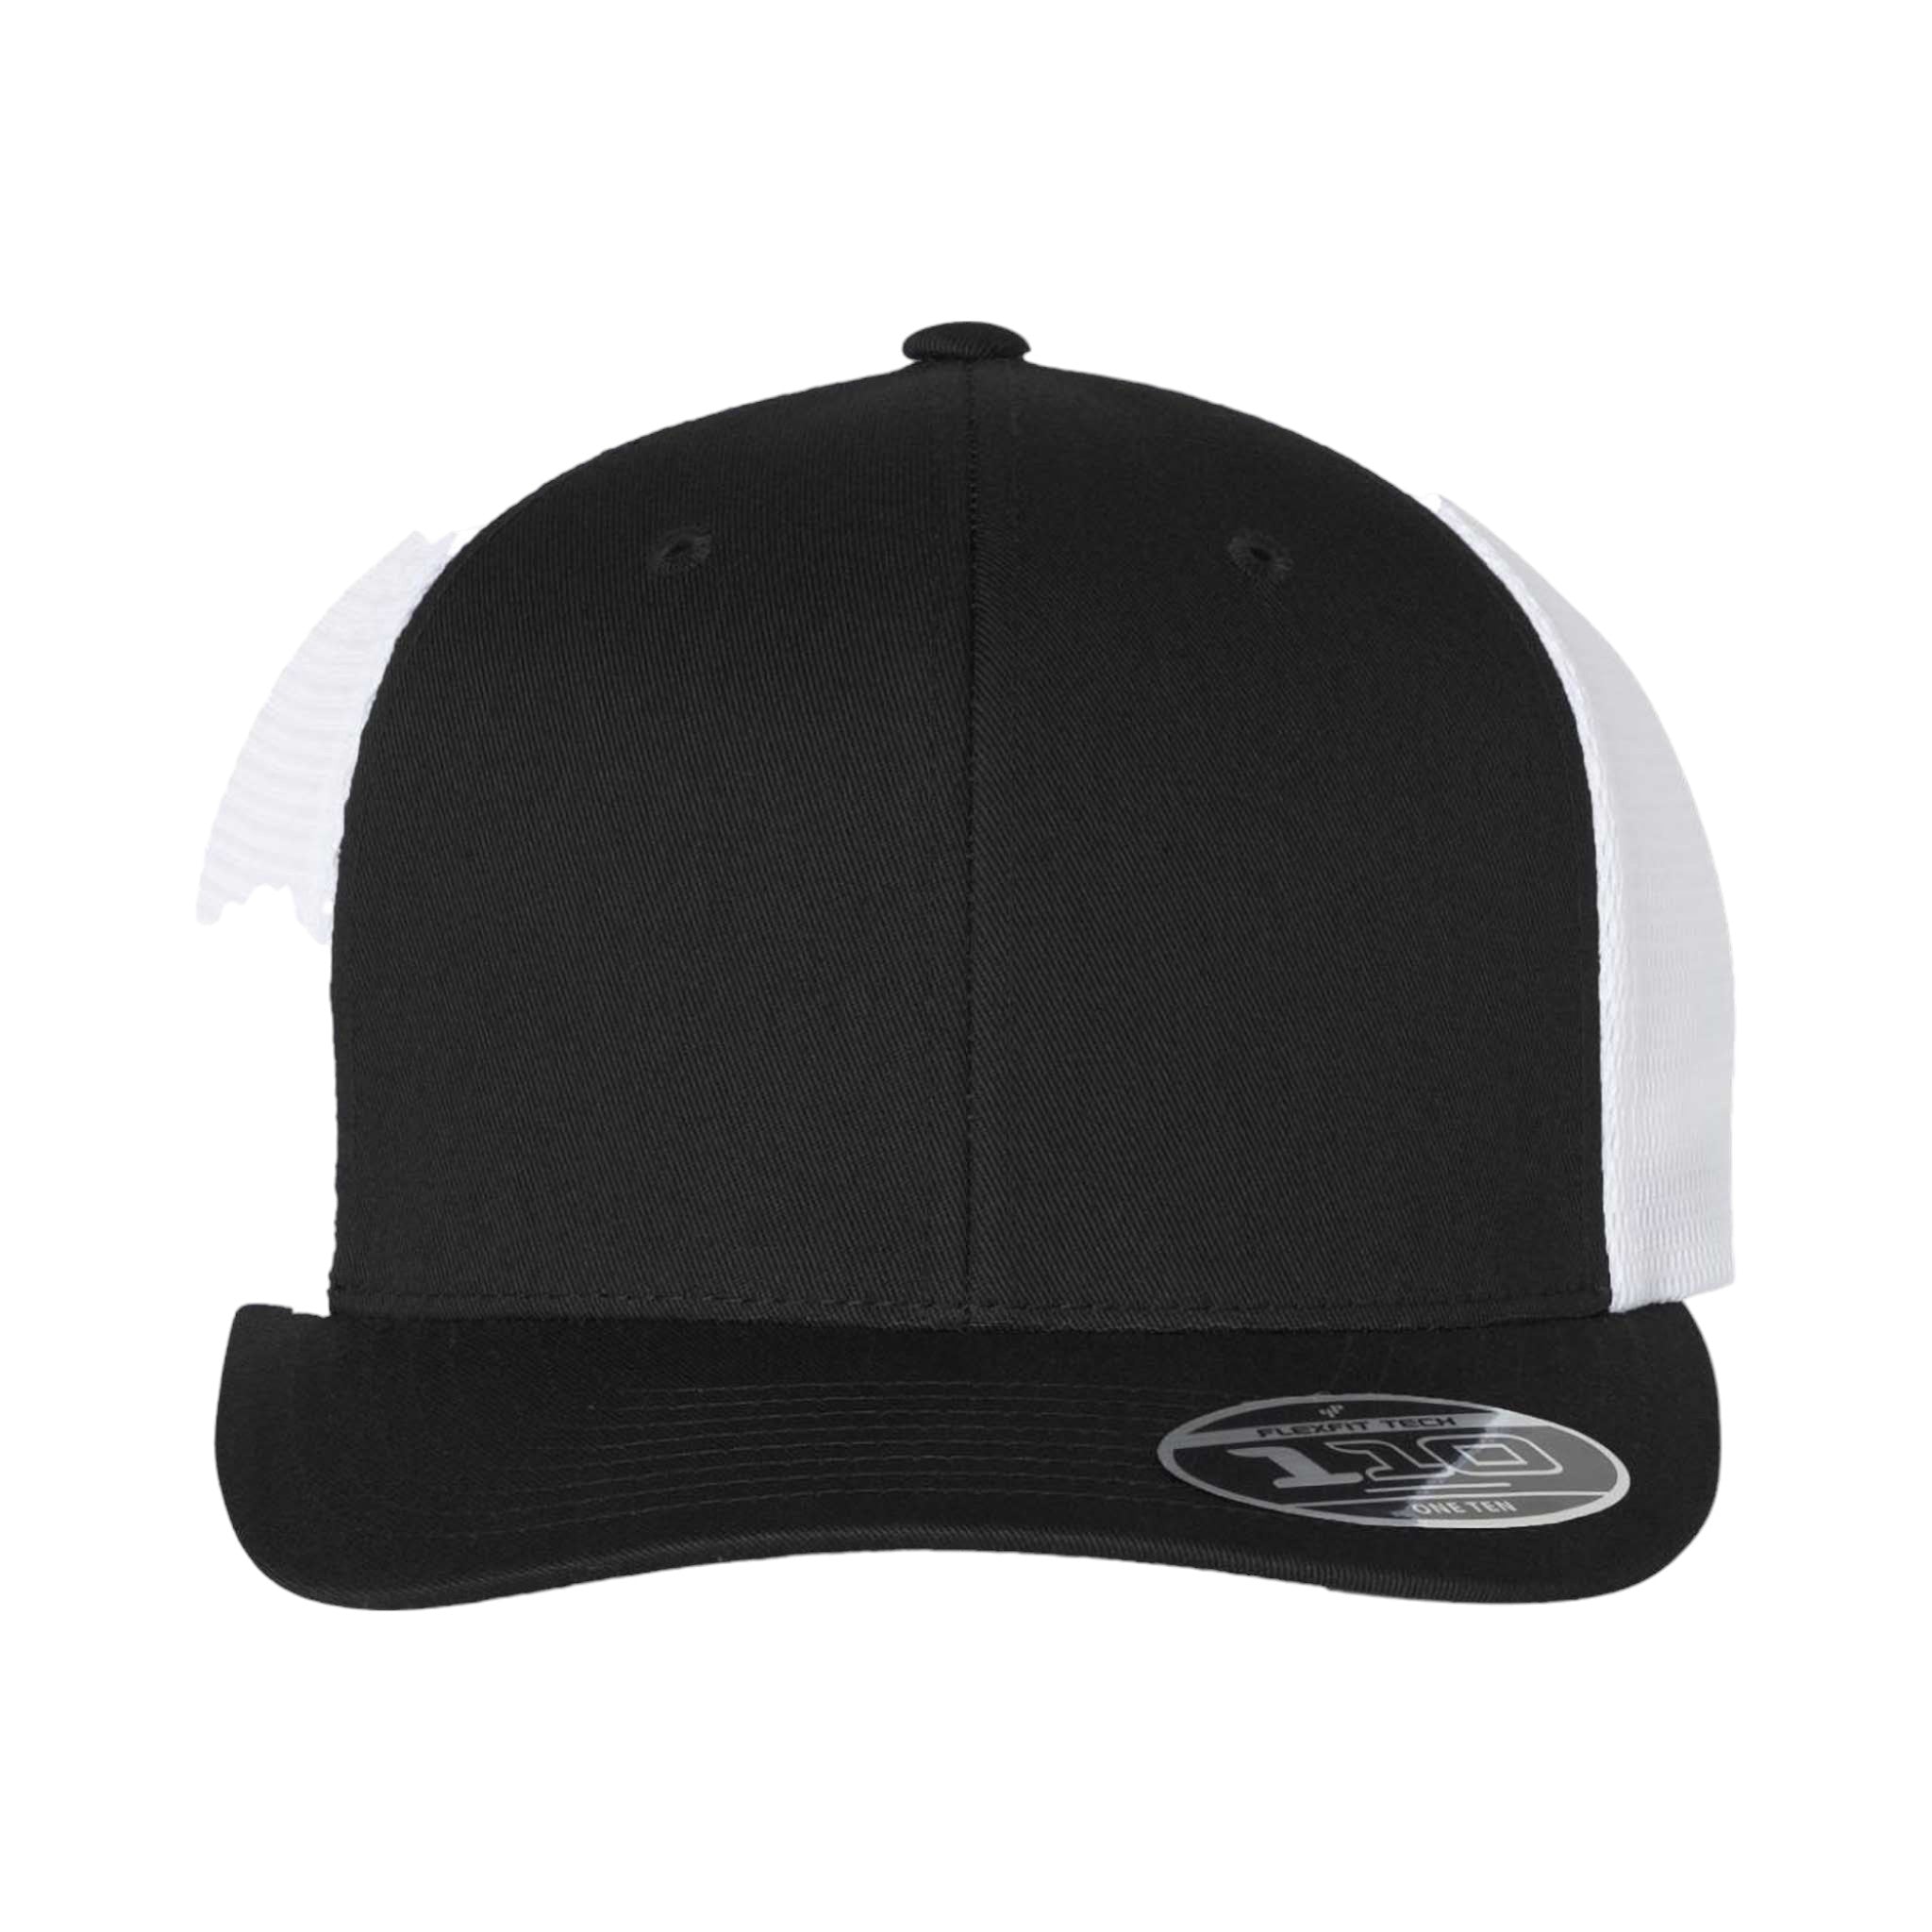 Front view of Flexfit 110M custom hat in black and white